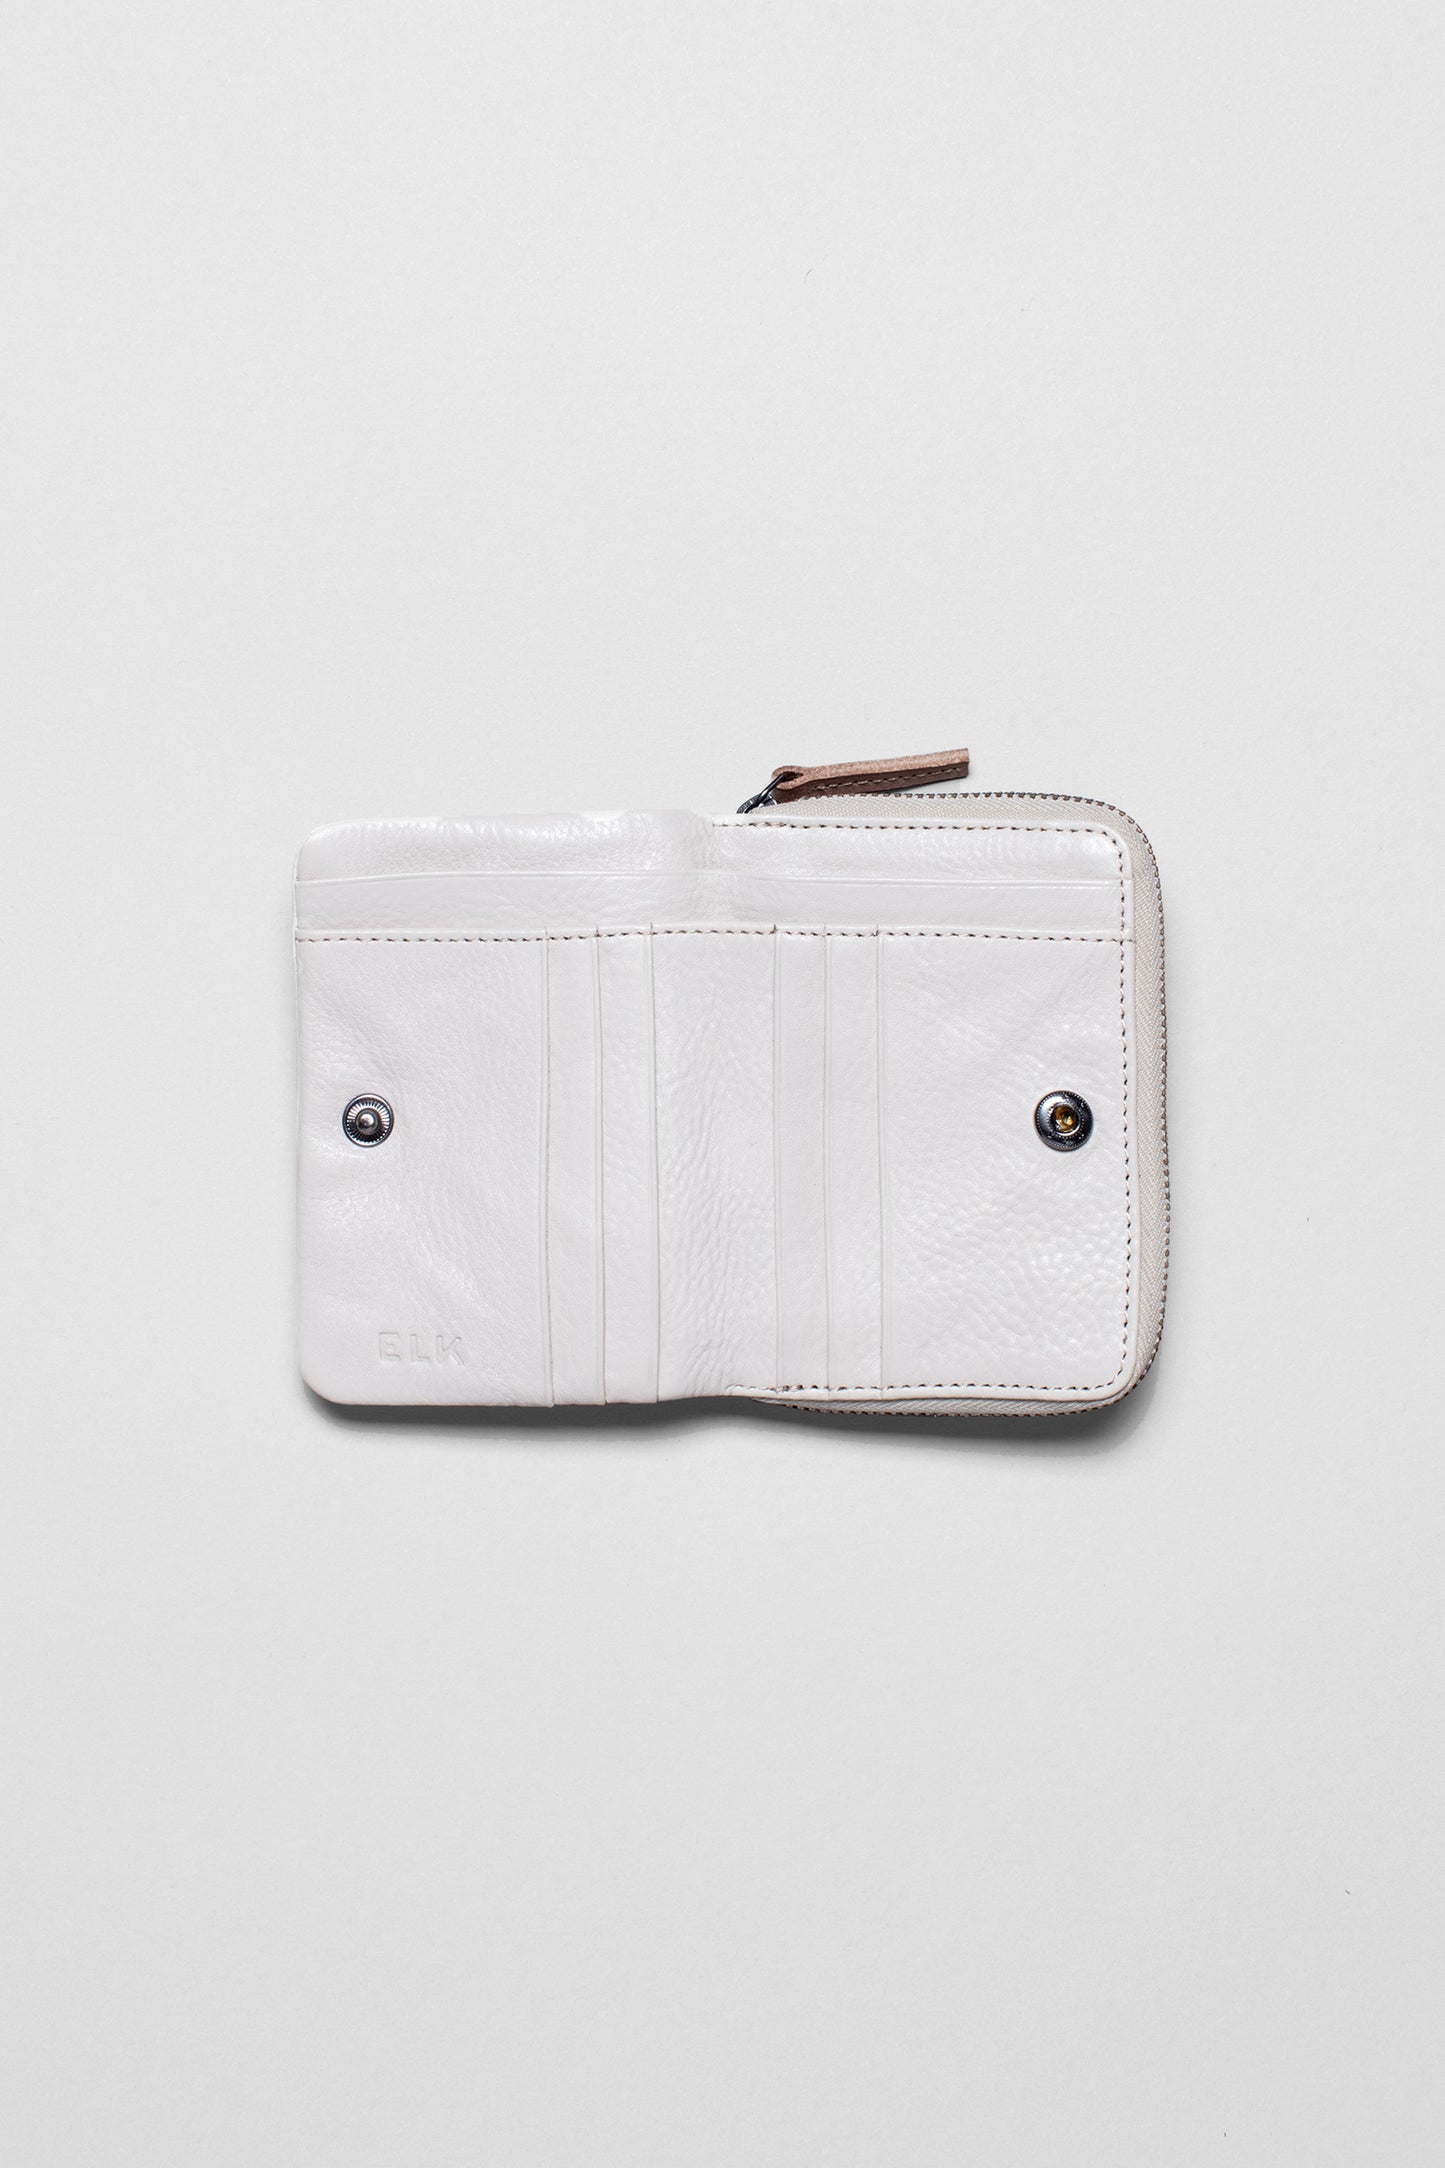 Canutte Leather Wallet Interior | BLANC / NATURAL